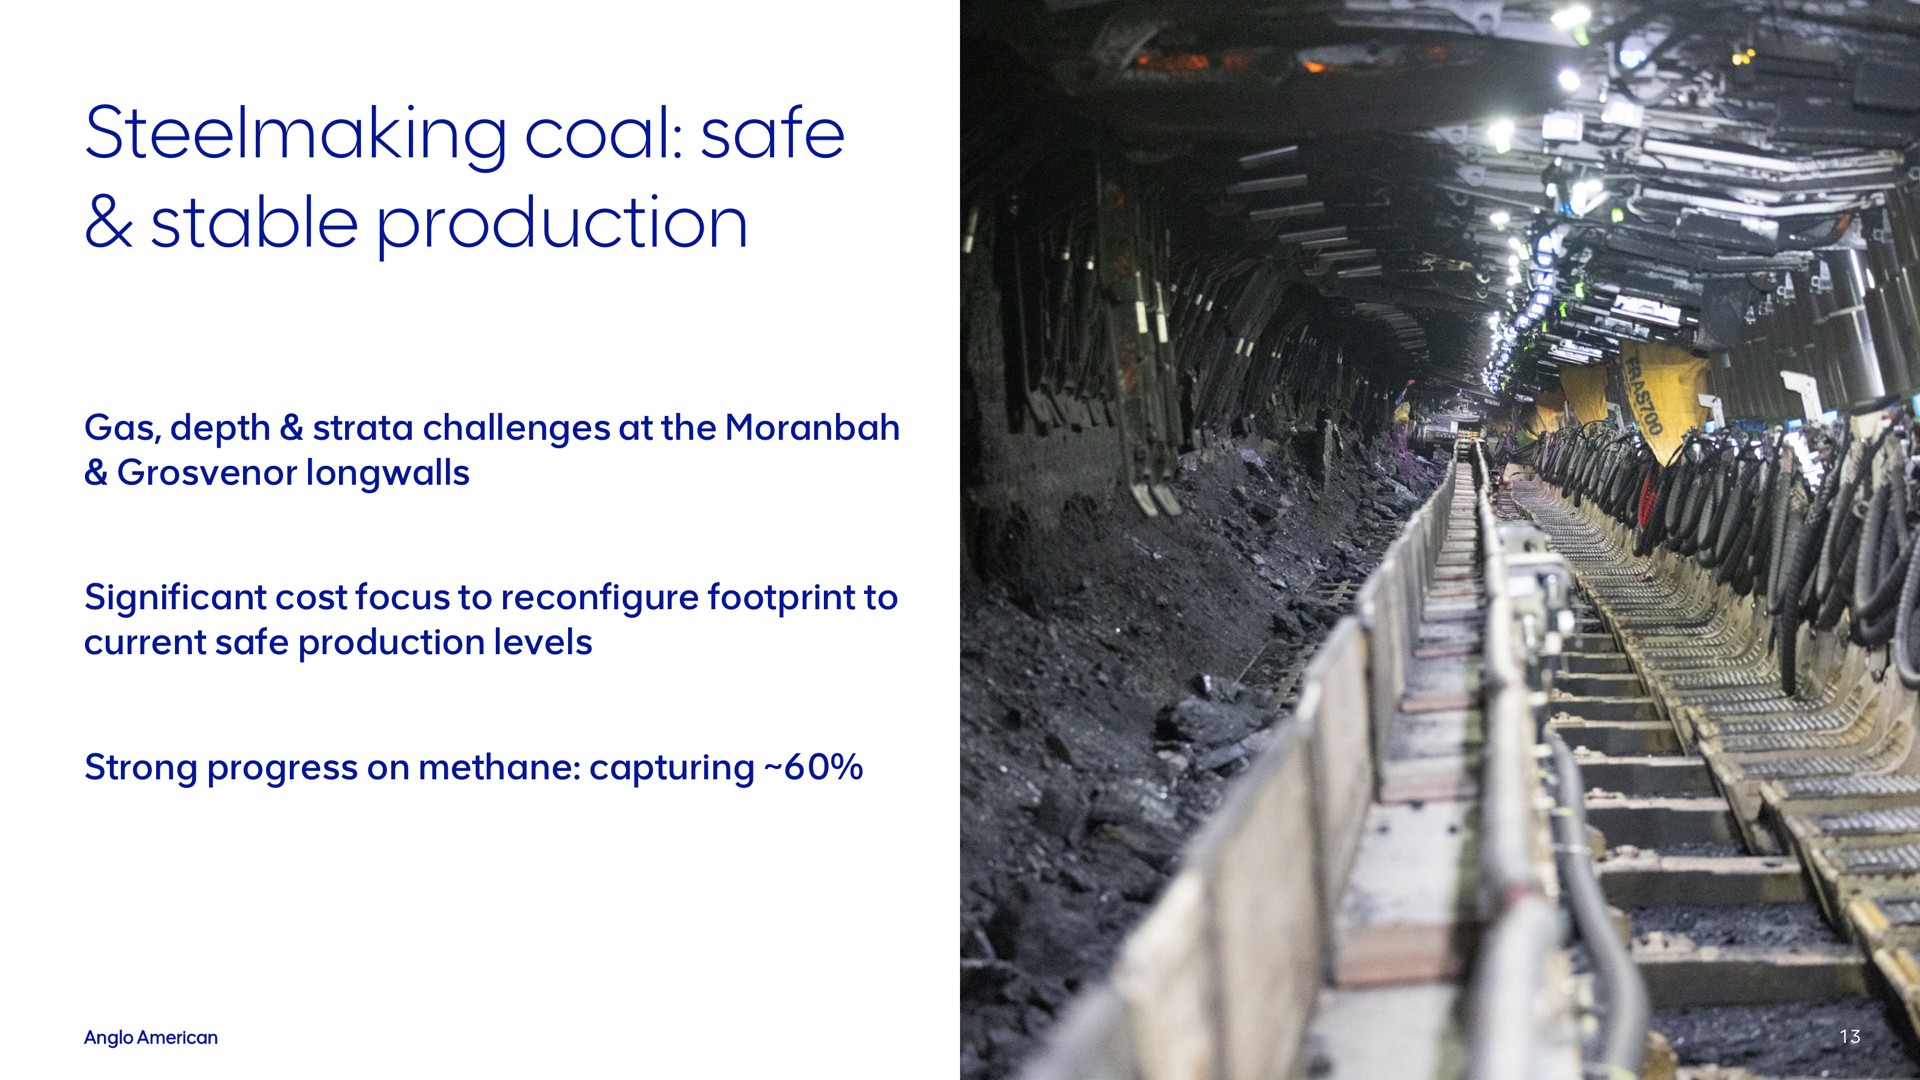 steelmaking coal safe stable production sate | AngloAmerican